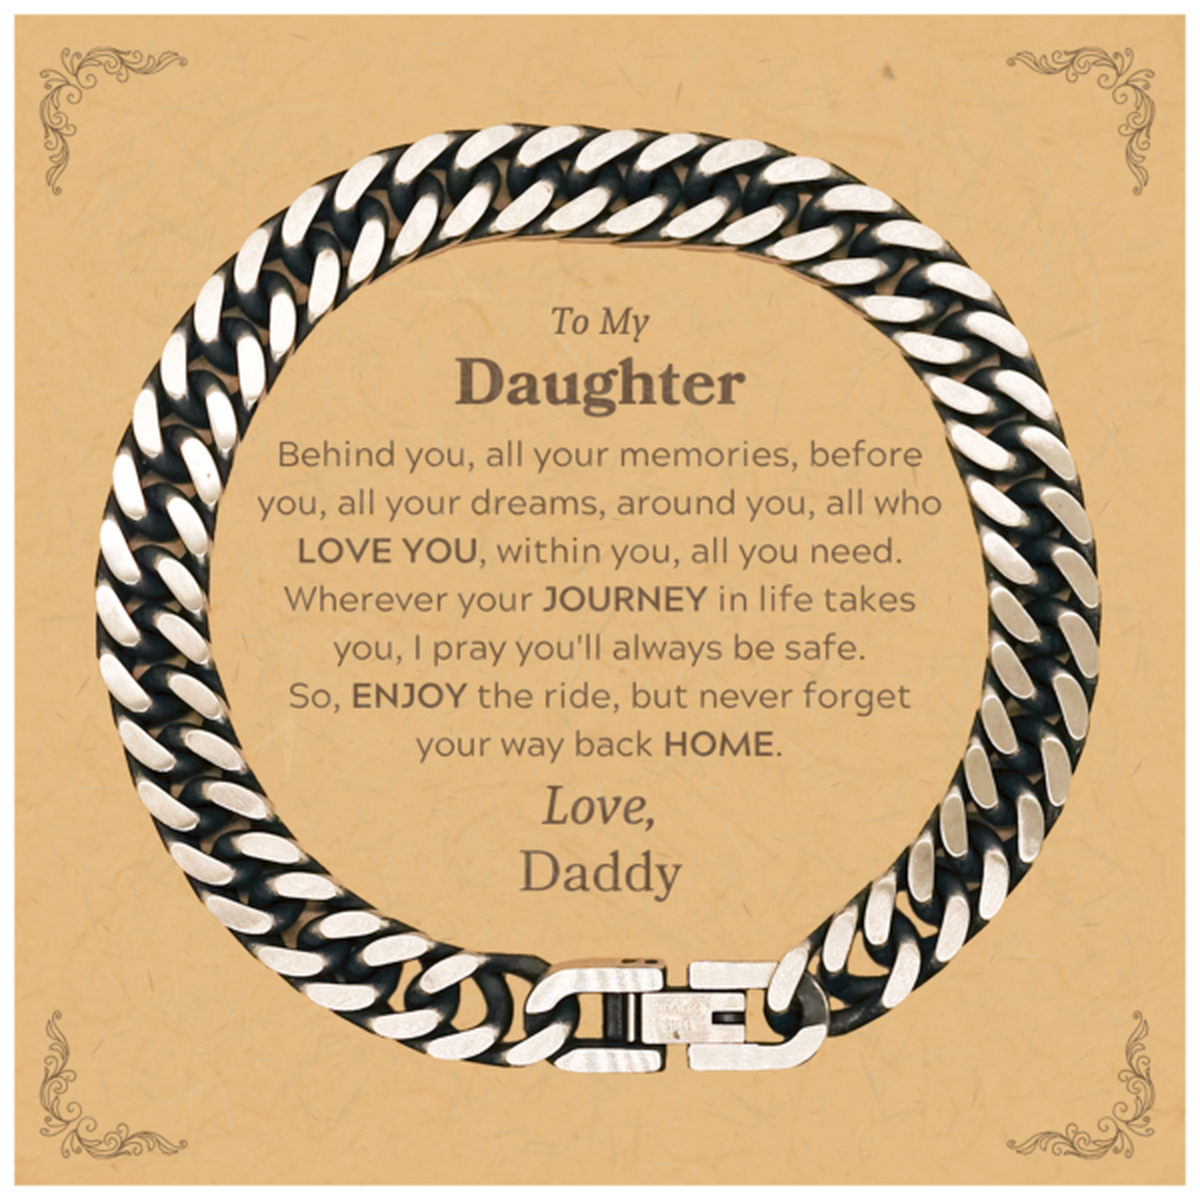 To My Daughter Graduation Gifts from Daddy, Daughter Cuban Link Chain Bracelet Christmas Birthday Gifts for Daughter Behind you, all your memories, before you, all your dreams. Love, Daddy